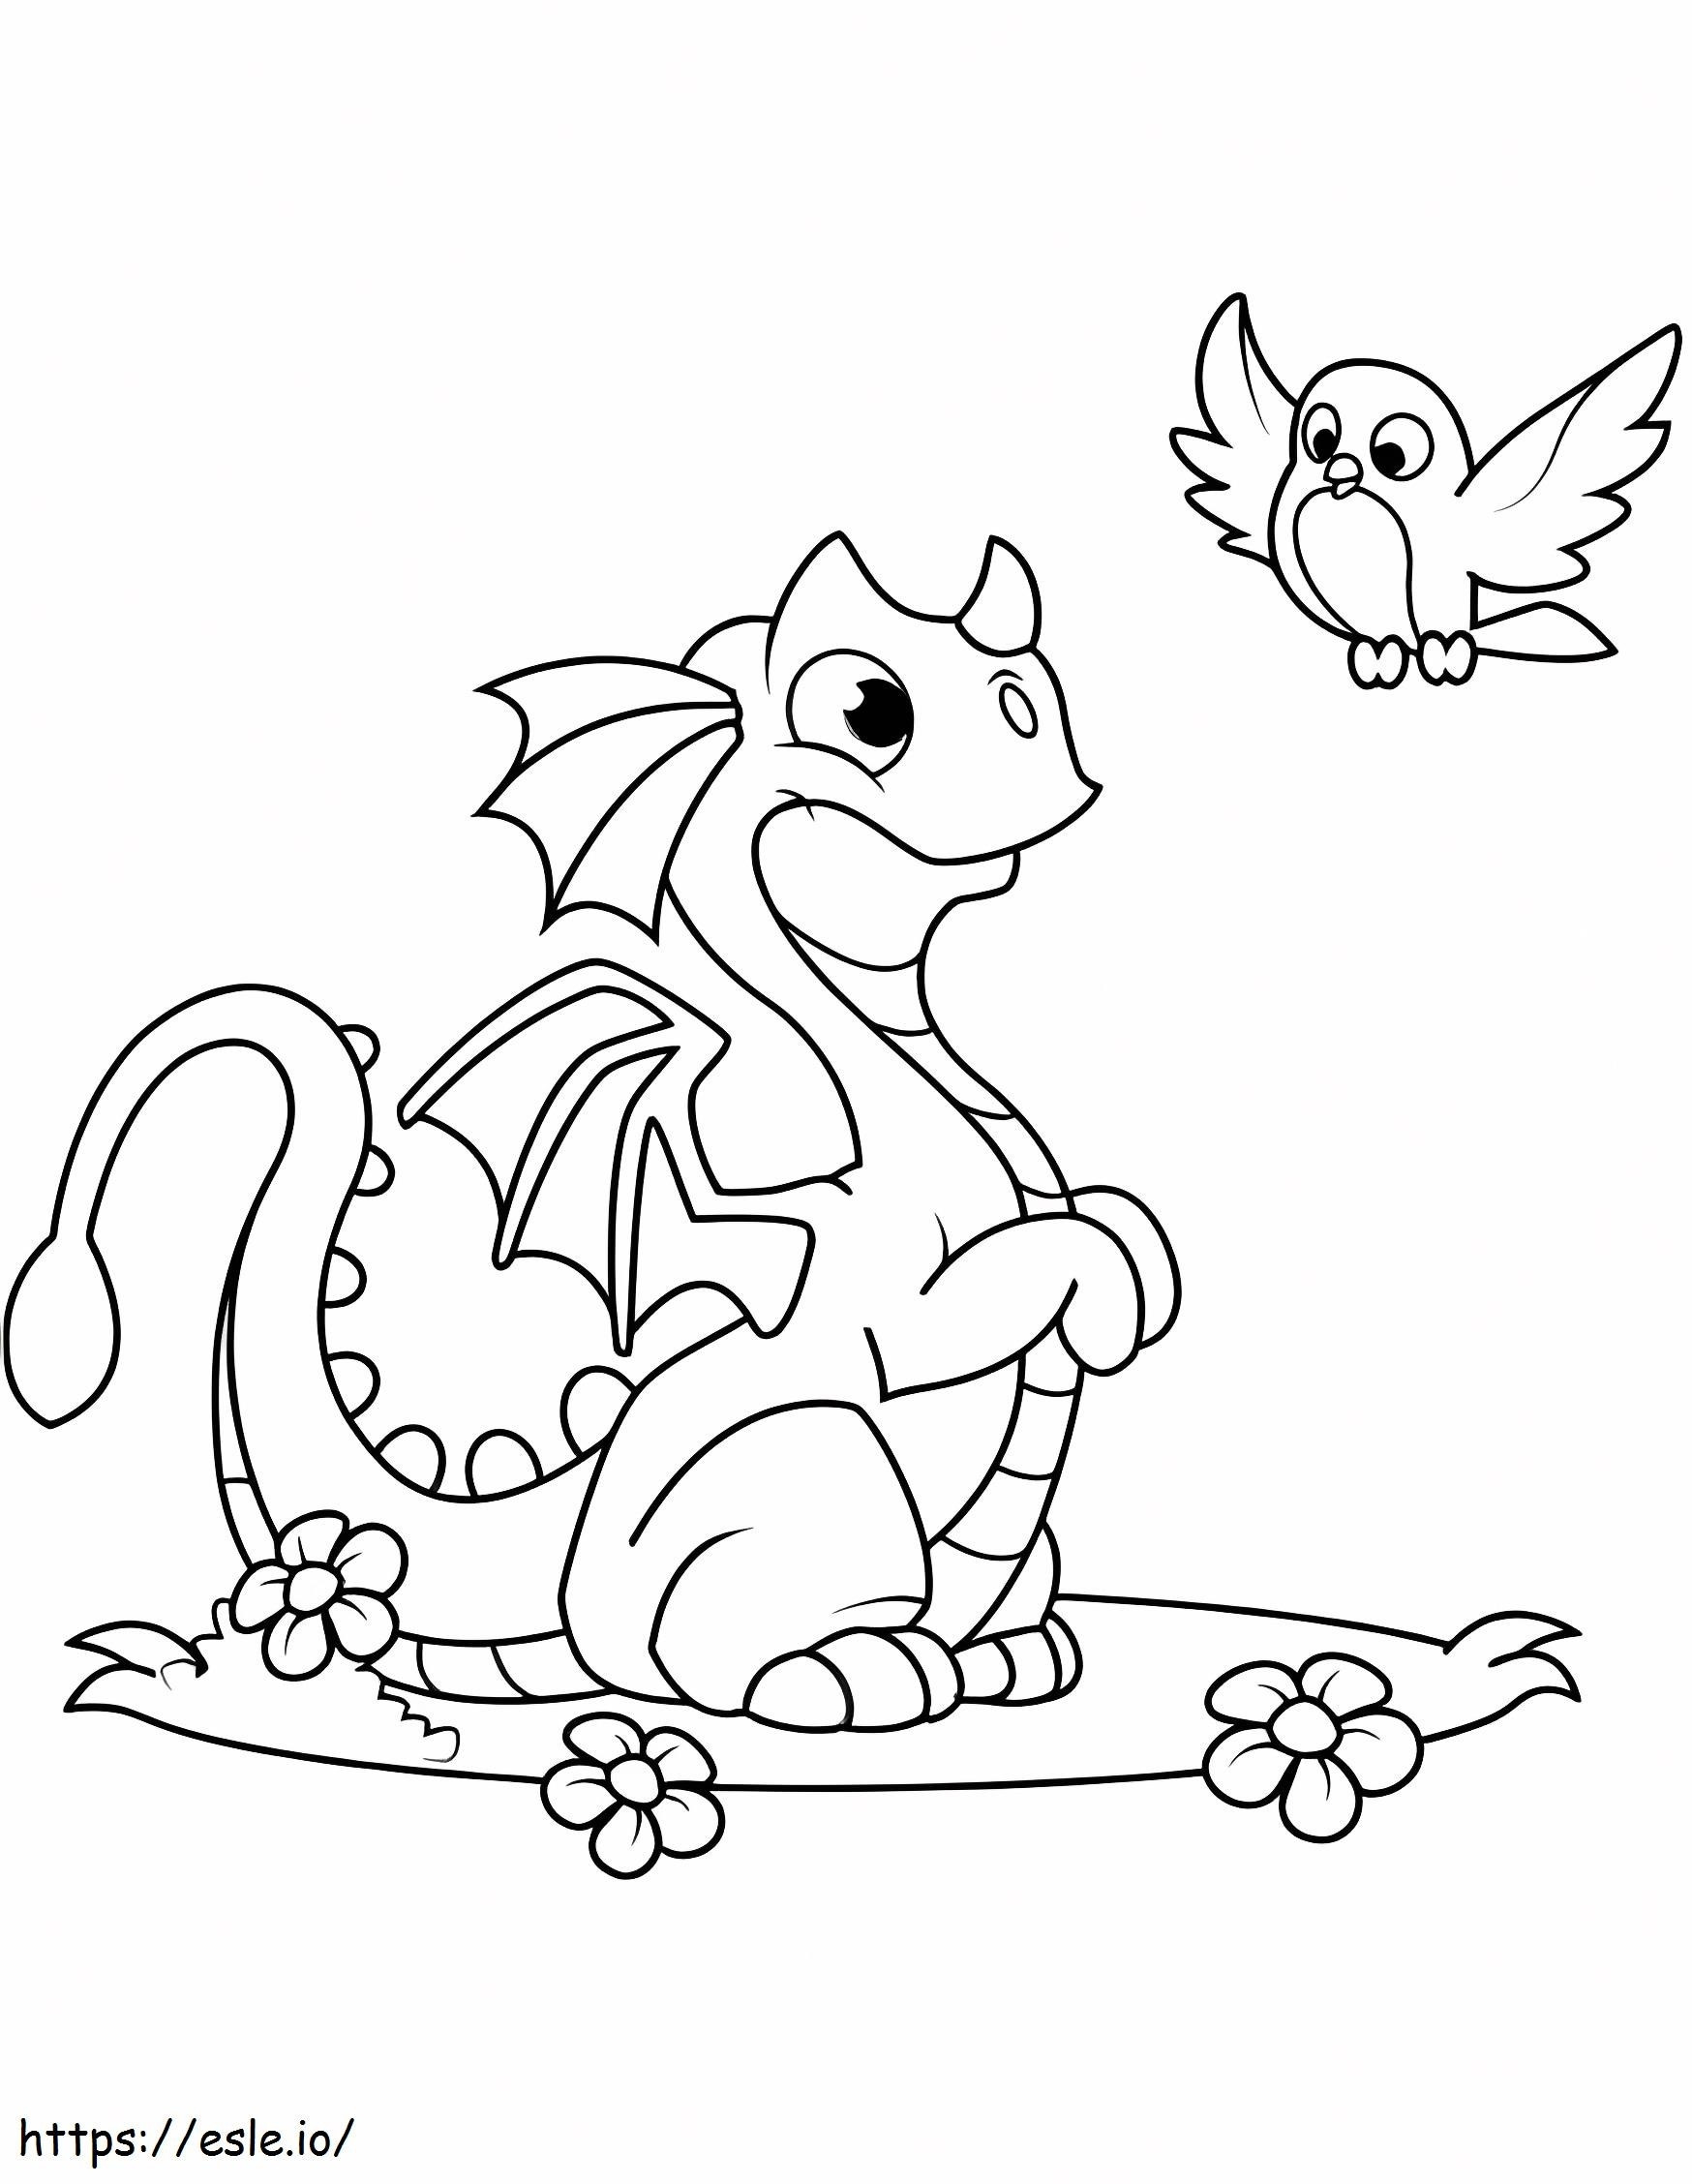 Sitting Dragon And Bird coloring page